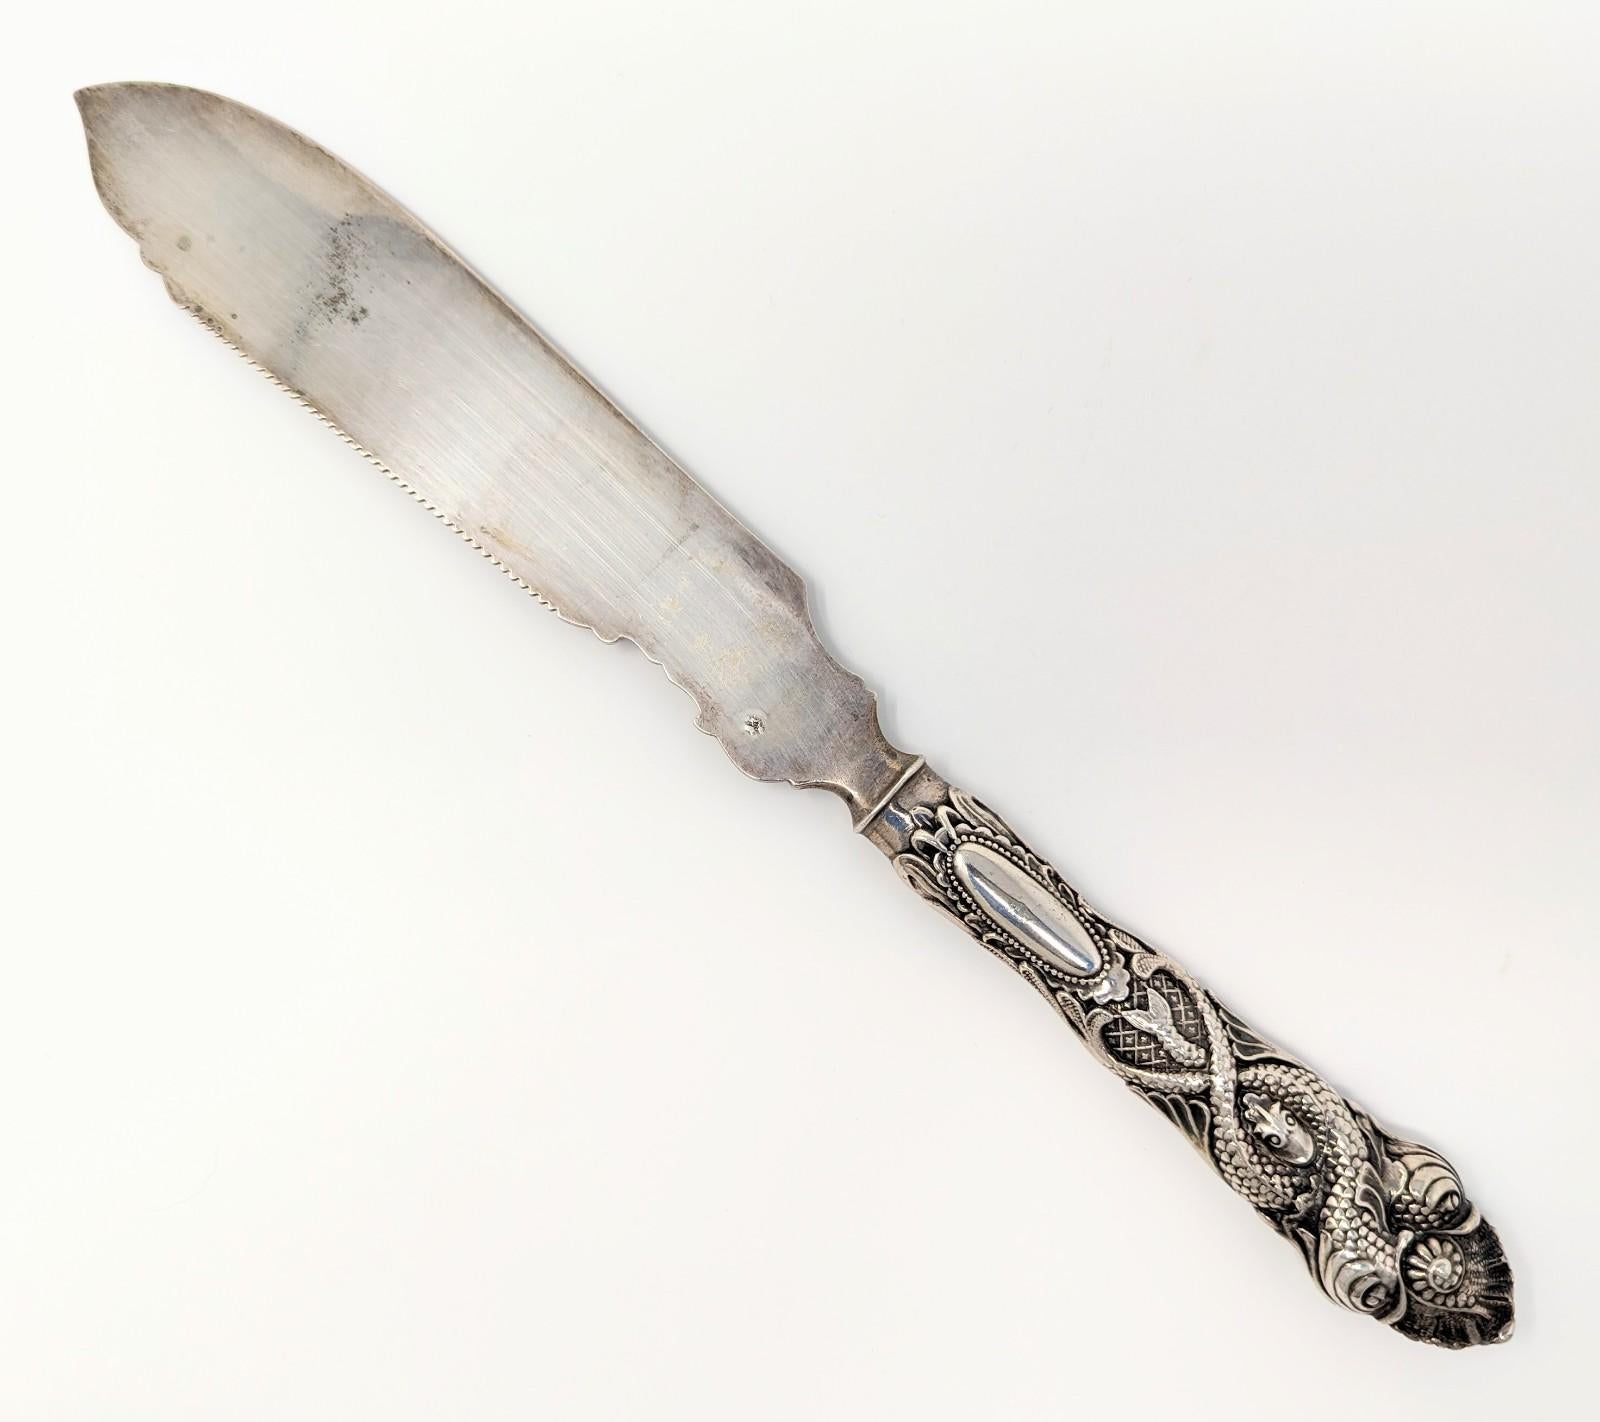 Stunning antique handcrafted fish or cake knife featuring unique sea serpent and shell pattern handle. The blade portion has intricate etchings, making this a wonderful piece of collectible art. Hallmarked on both sides of the blade as shown in the